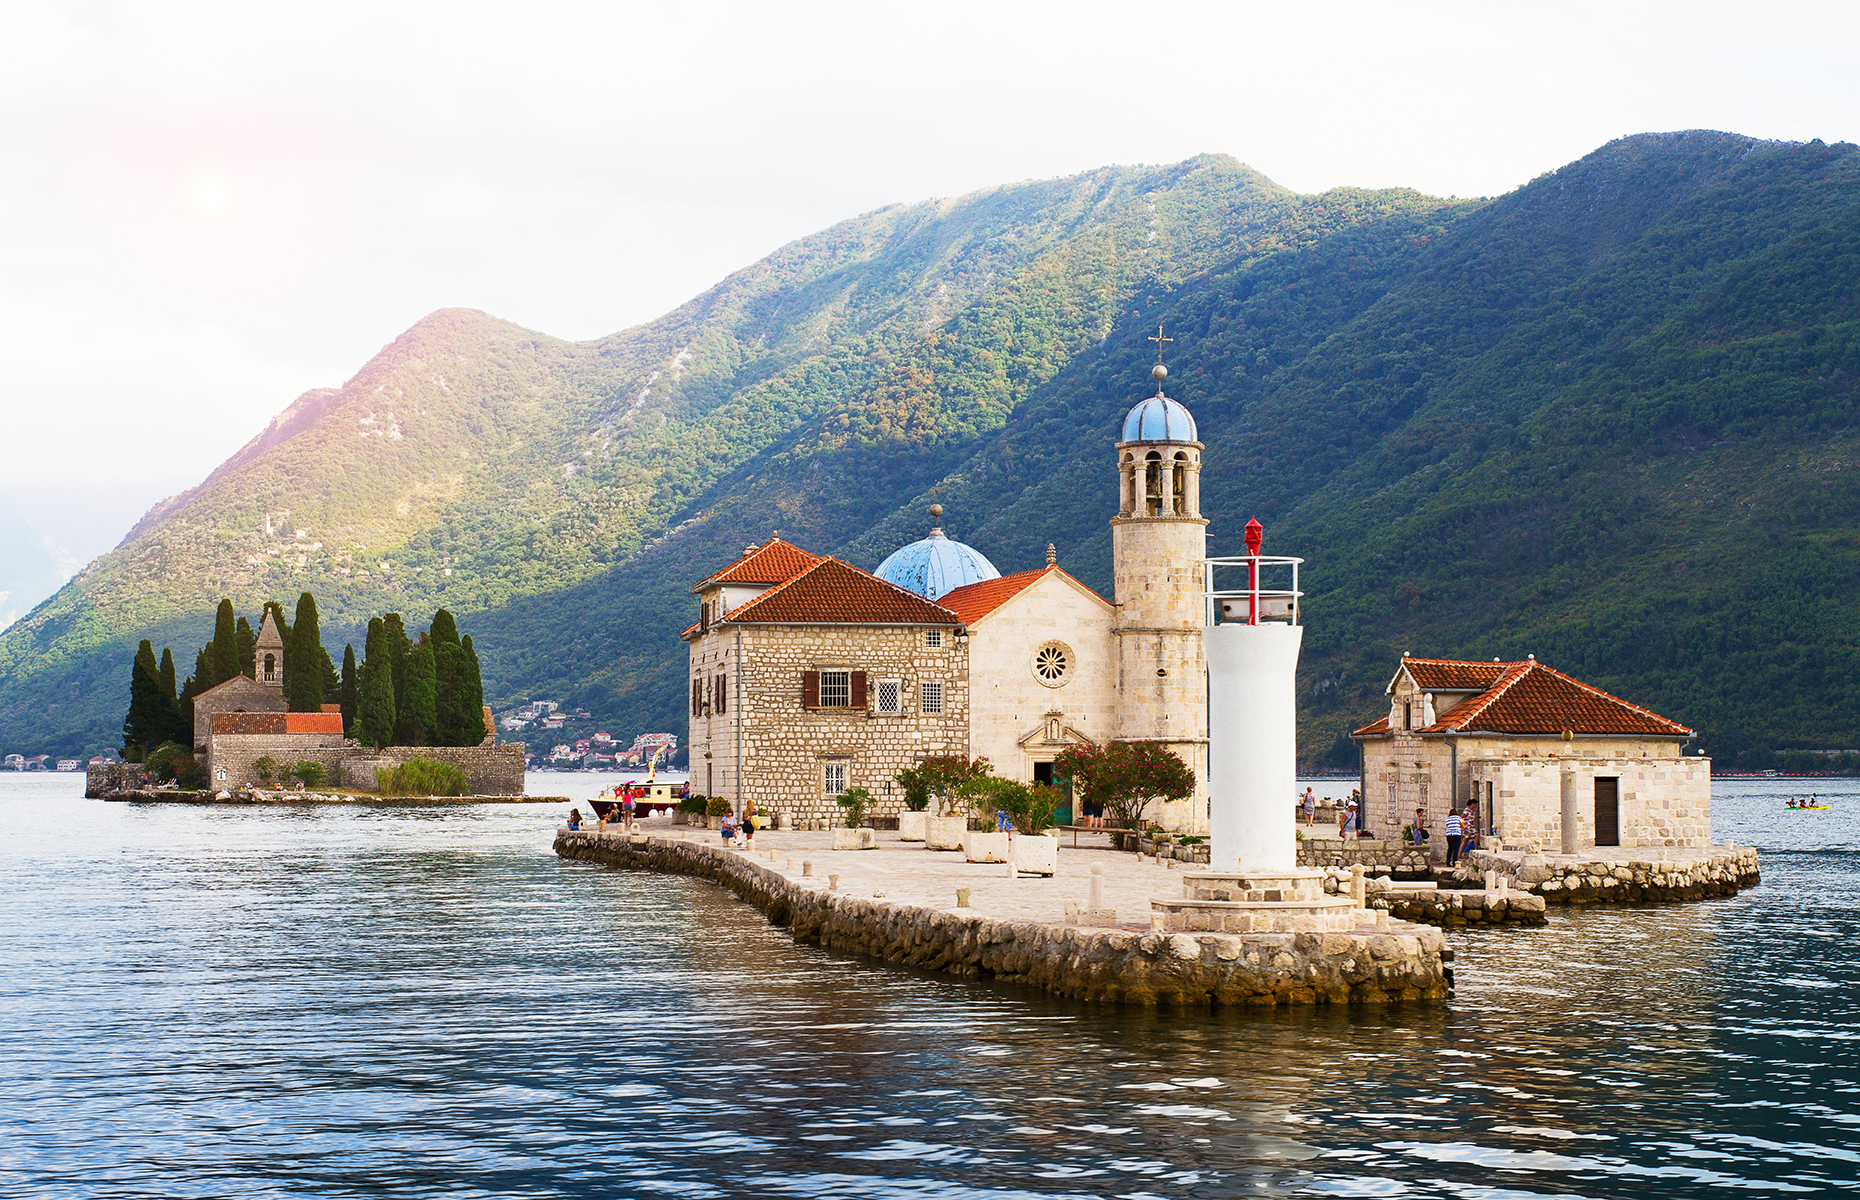 Our Lady of the Rocks, Montenegro. (Image: freeskyline/Shutterstock)